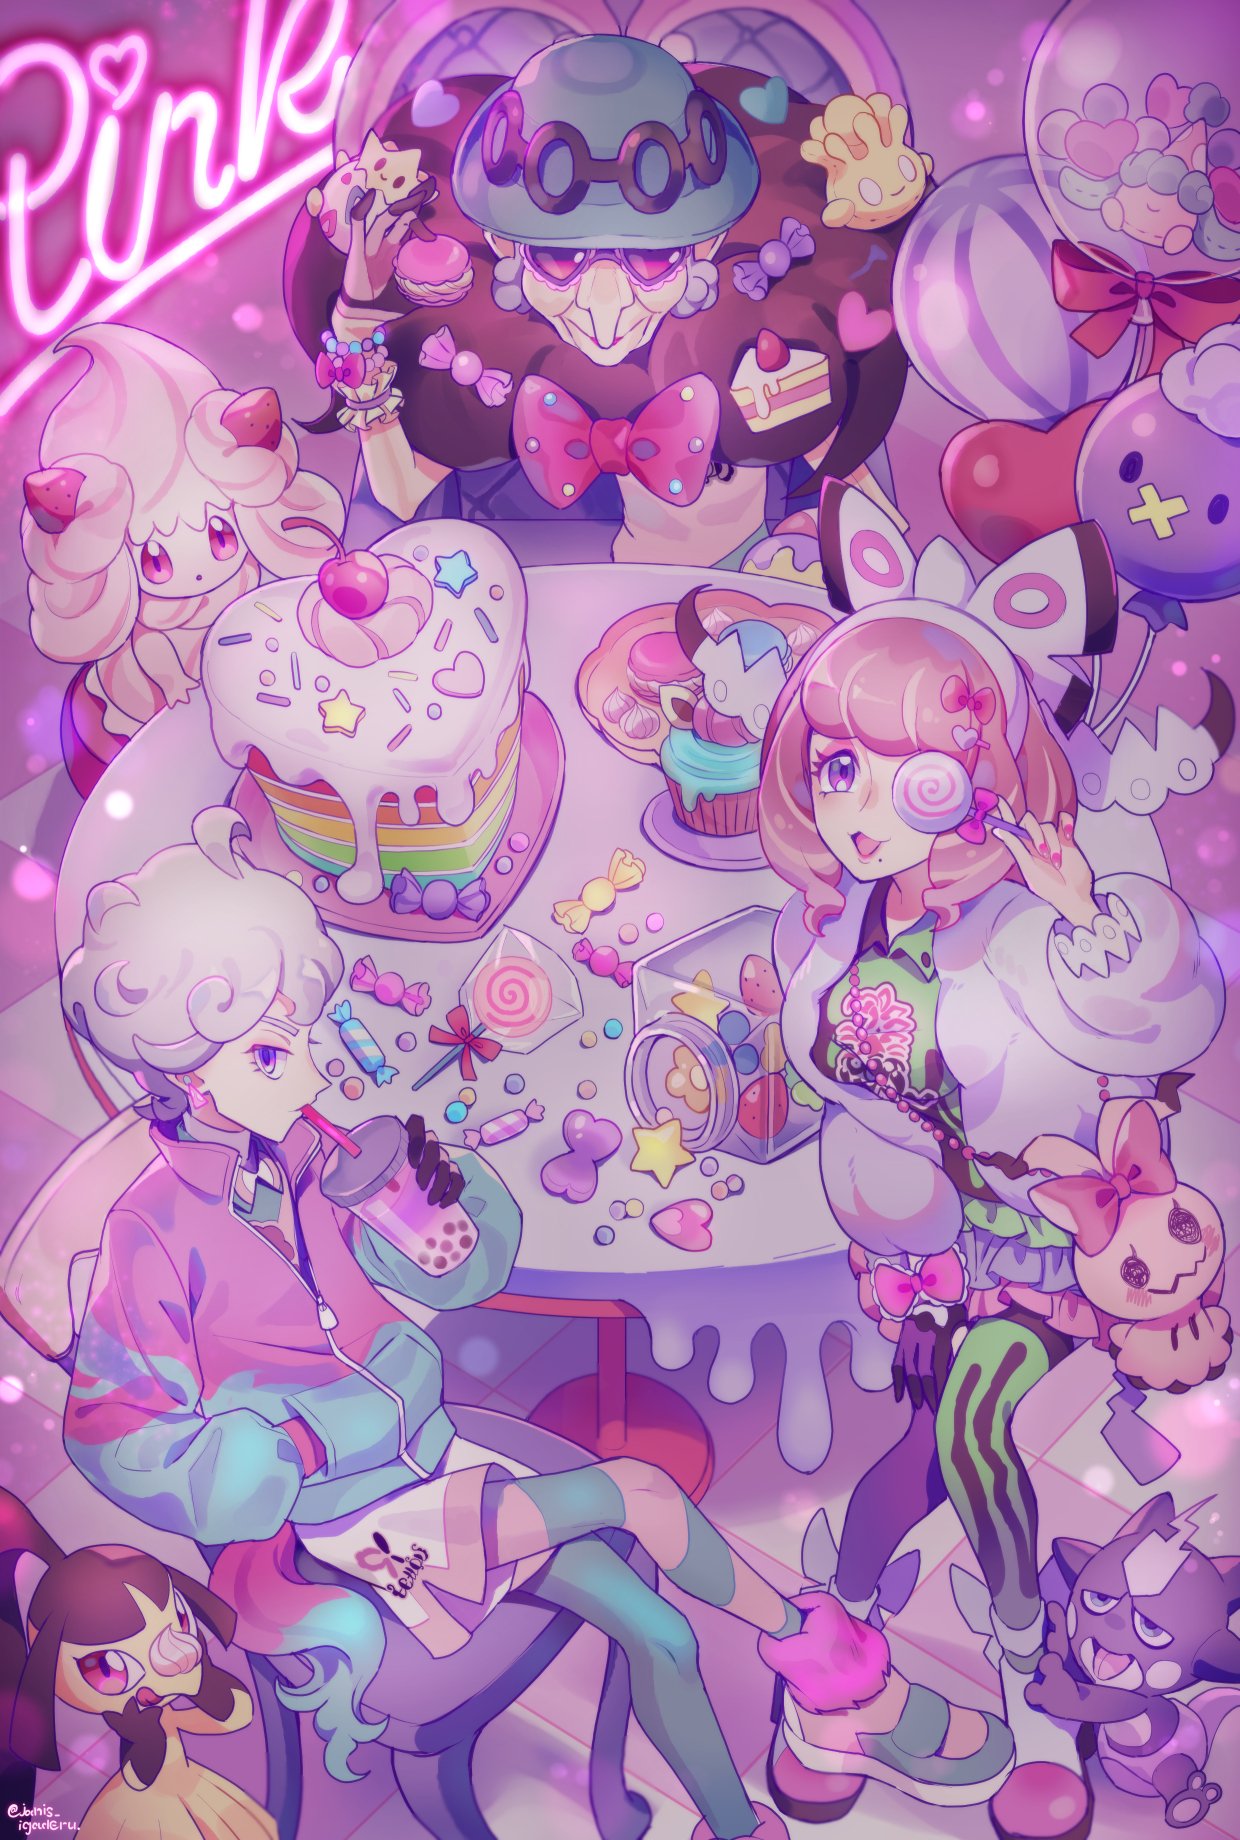 1boy 2girls ahoge alcremie alcremie_(strawberry_sweet) balloon bangs bede_(pokemon) bubble_tea cake candy_wrapper chair collared_shirt commentary_request cup cupcake curly_hair drifloon drinking drinking_straw food fur_jacket fur_scarf gloves green_headwear green_shirt hat hatenna highres holding holding_cup jacket janis_(hainegom) klara_(pokemon) mawile milcery mimikyu multiple_girls opal_(pokemon) plate pokemon pokemon_(creature) pokemon_(game) pokemon_swsh purple_eyes shirt short_hair sitting table thighhighs togepi toxel zipper_pull_tab